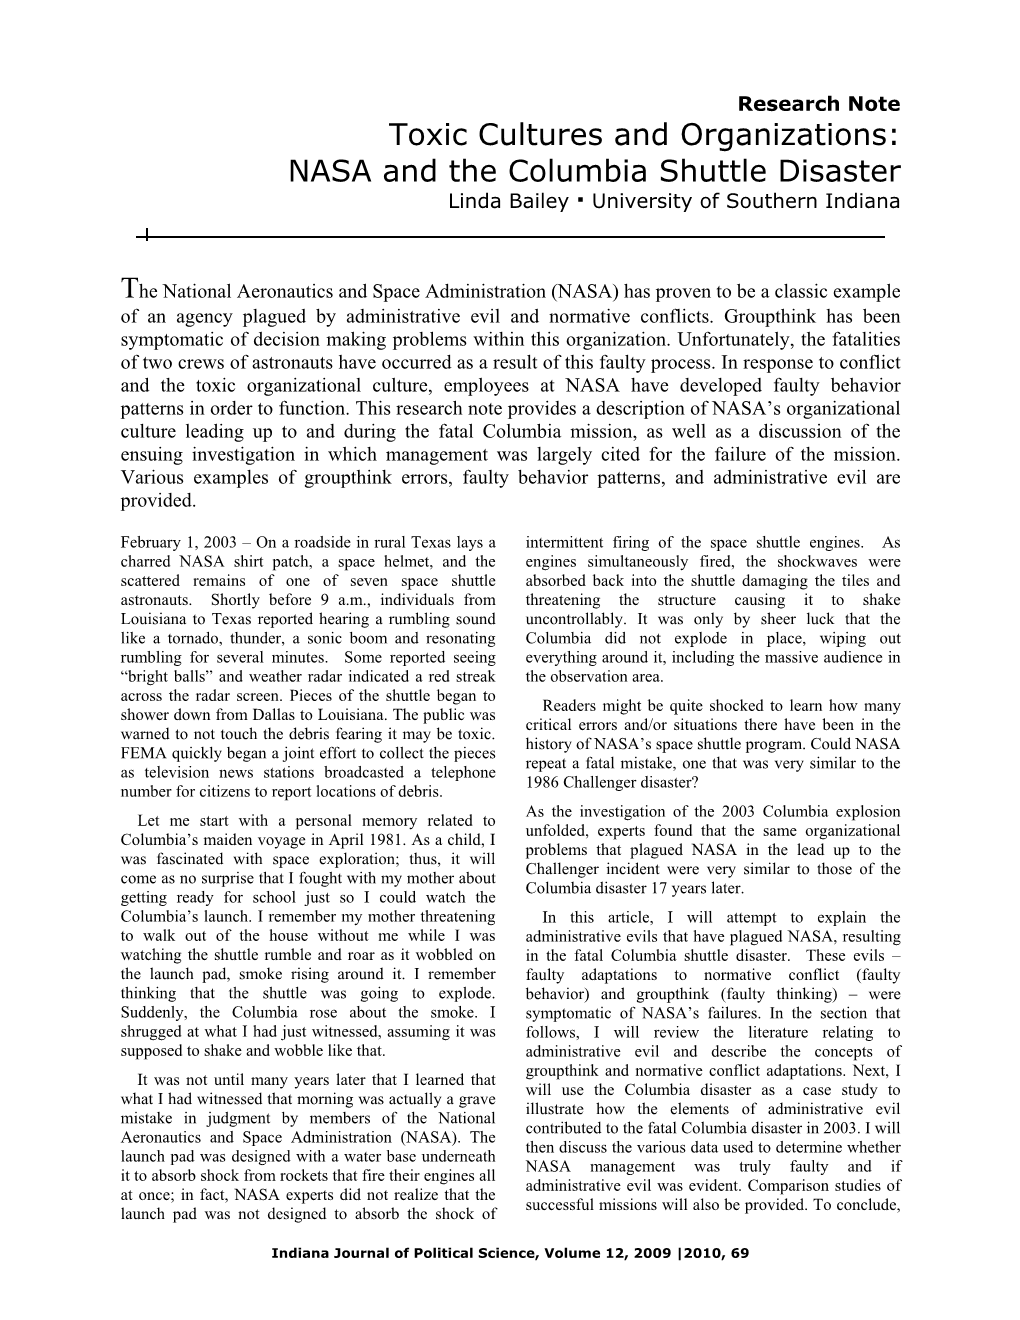 NASA and the Columbia Shuttle Disaster Linda Bailey ‚ University of Southern Indiana